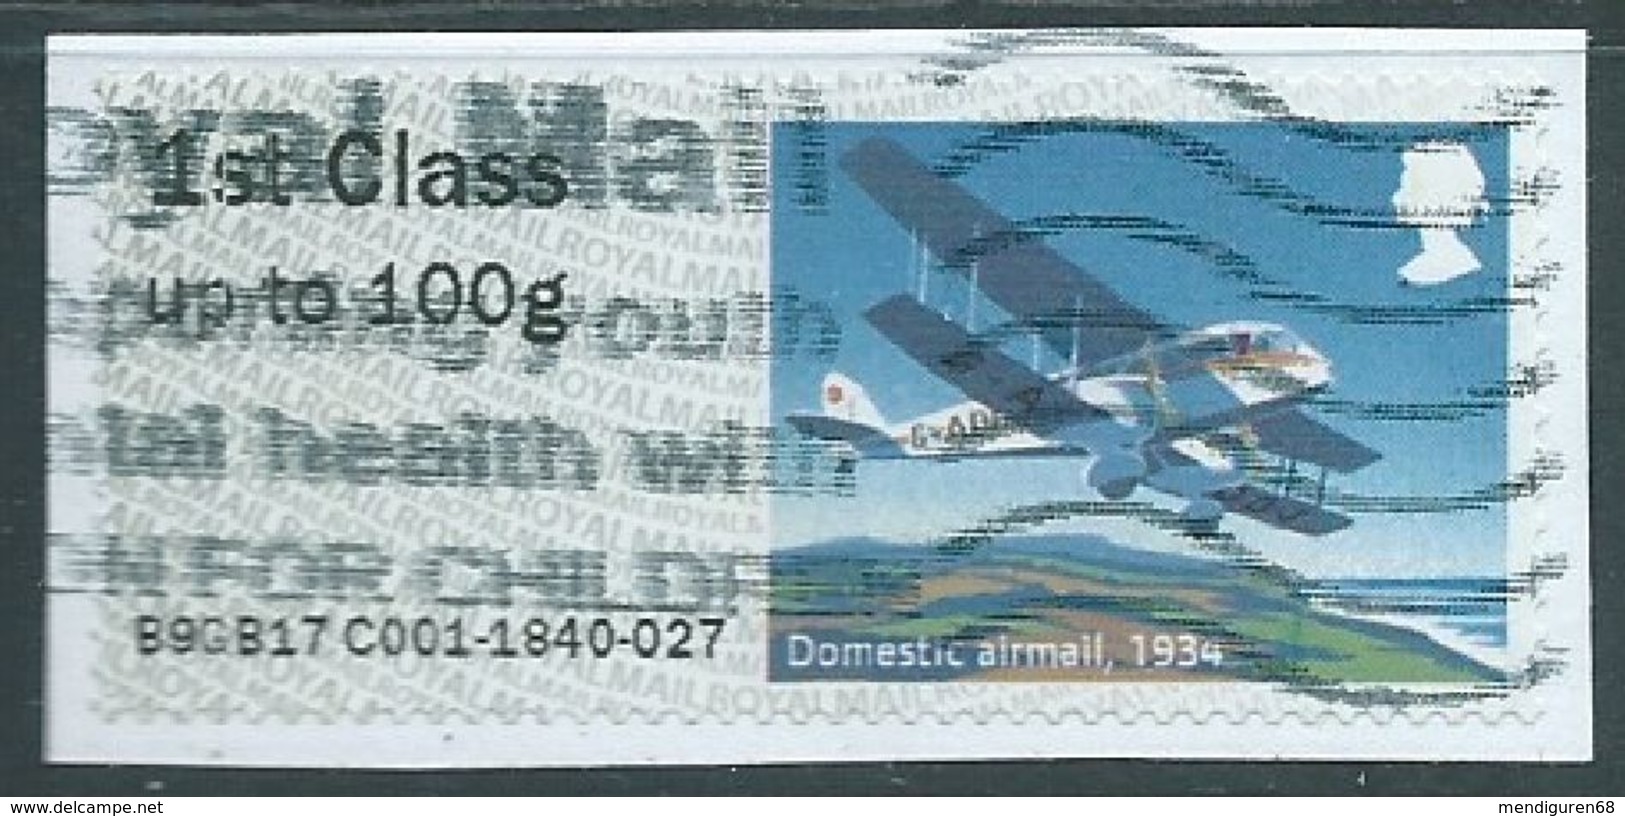 GROSBRITANNIEN GRANDE BRETAGNE GB POST&GO 2017 R.M.HERITAGE MAIL BY AIR: DOMESTIC AIRMAIL1934 FCup To 100g USED SG FS188 - Post & Go Stamps